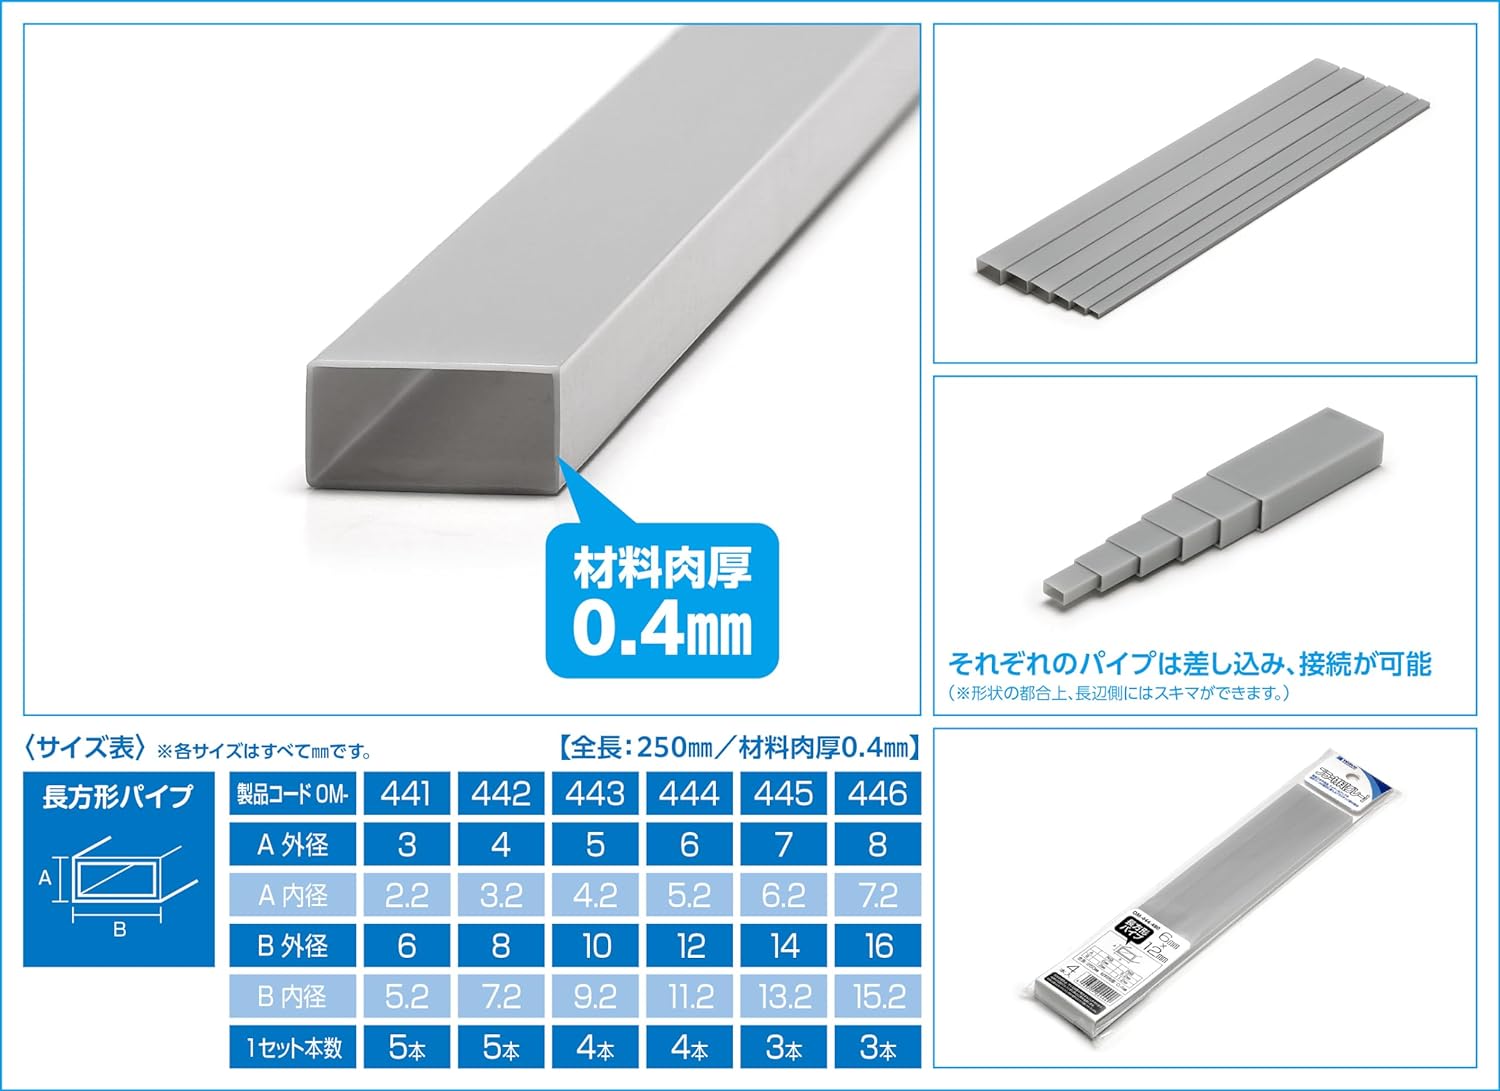 Wave OM-442 Plastic Material, Gray, Rectangular Pipe, 0.2 x 0.3 inches (4 x 8 mm), 5 Pieces - BanzaiHobby